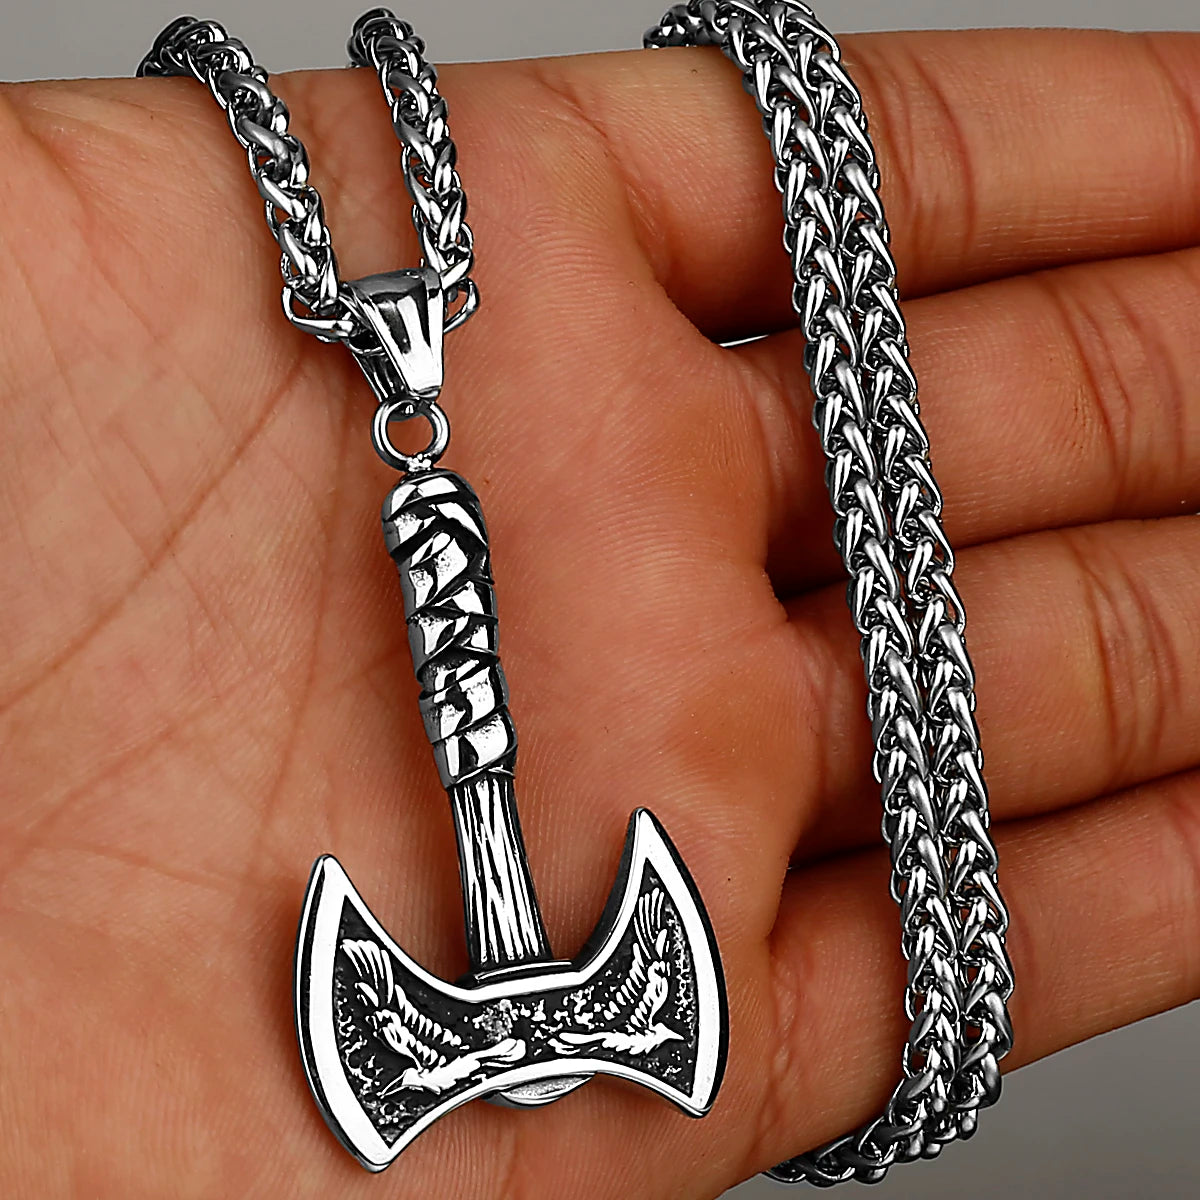 Viking Axe Necklace Pendant - Mythical Pieces Only Pendant / WJ 62